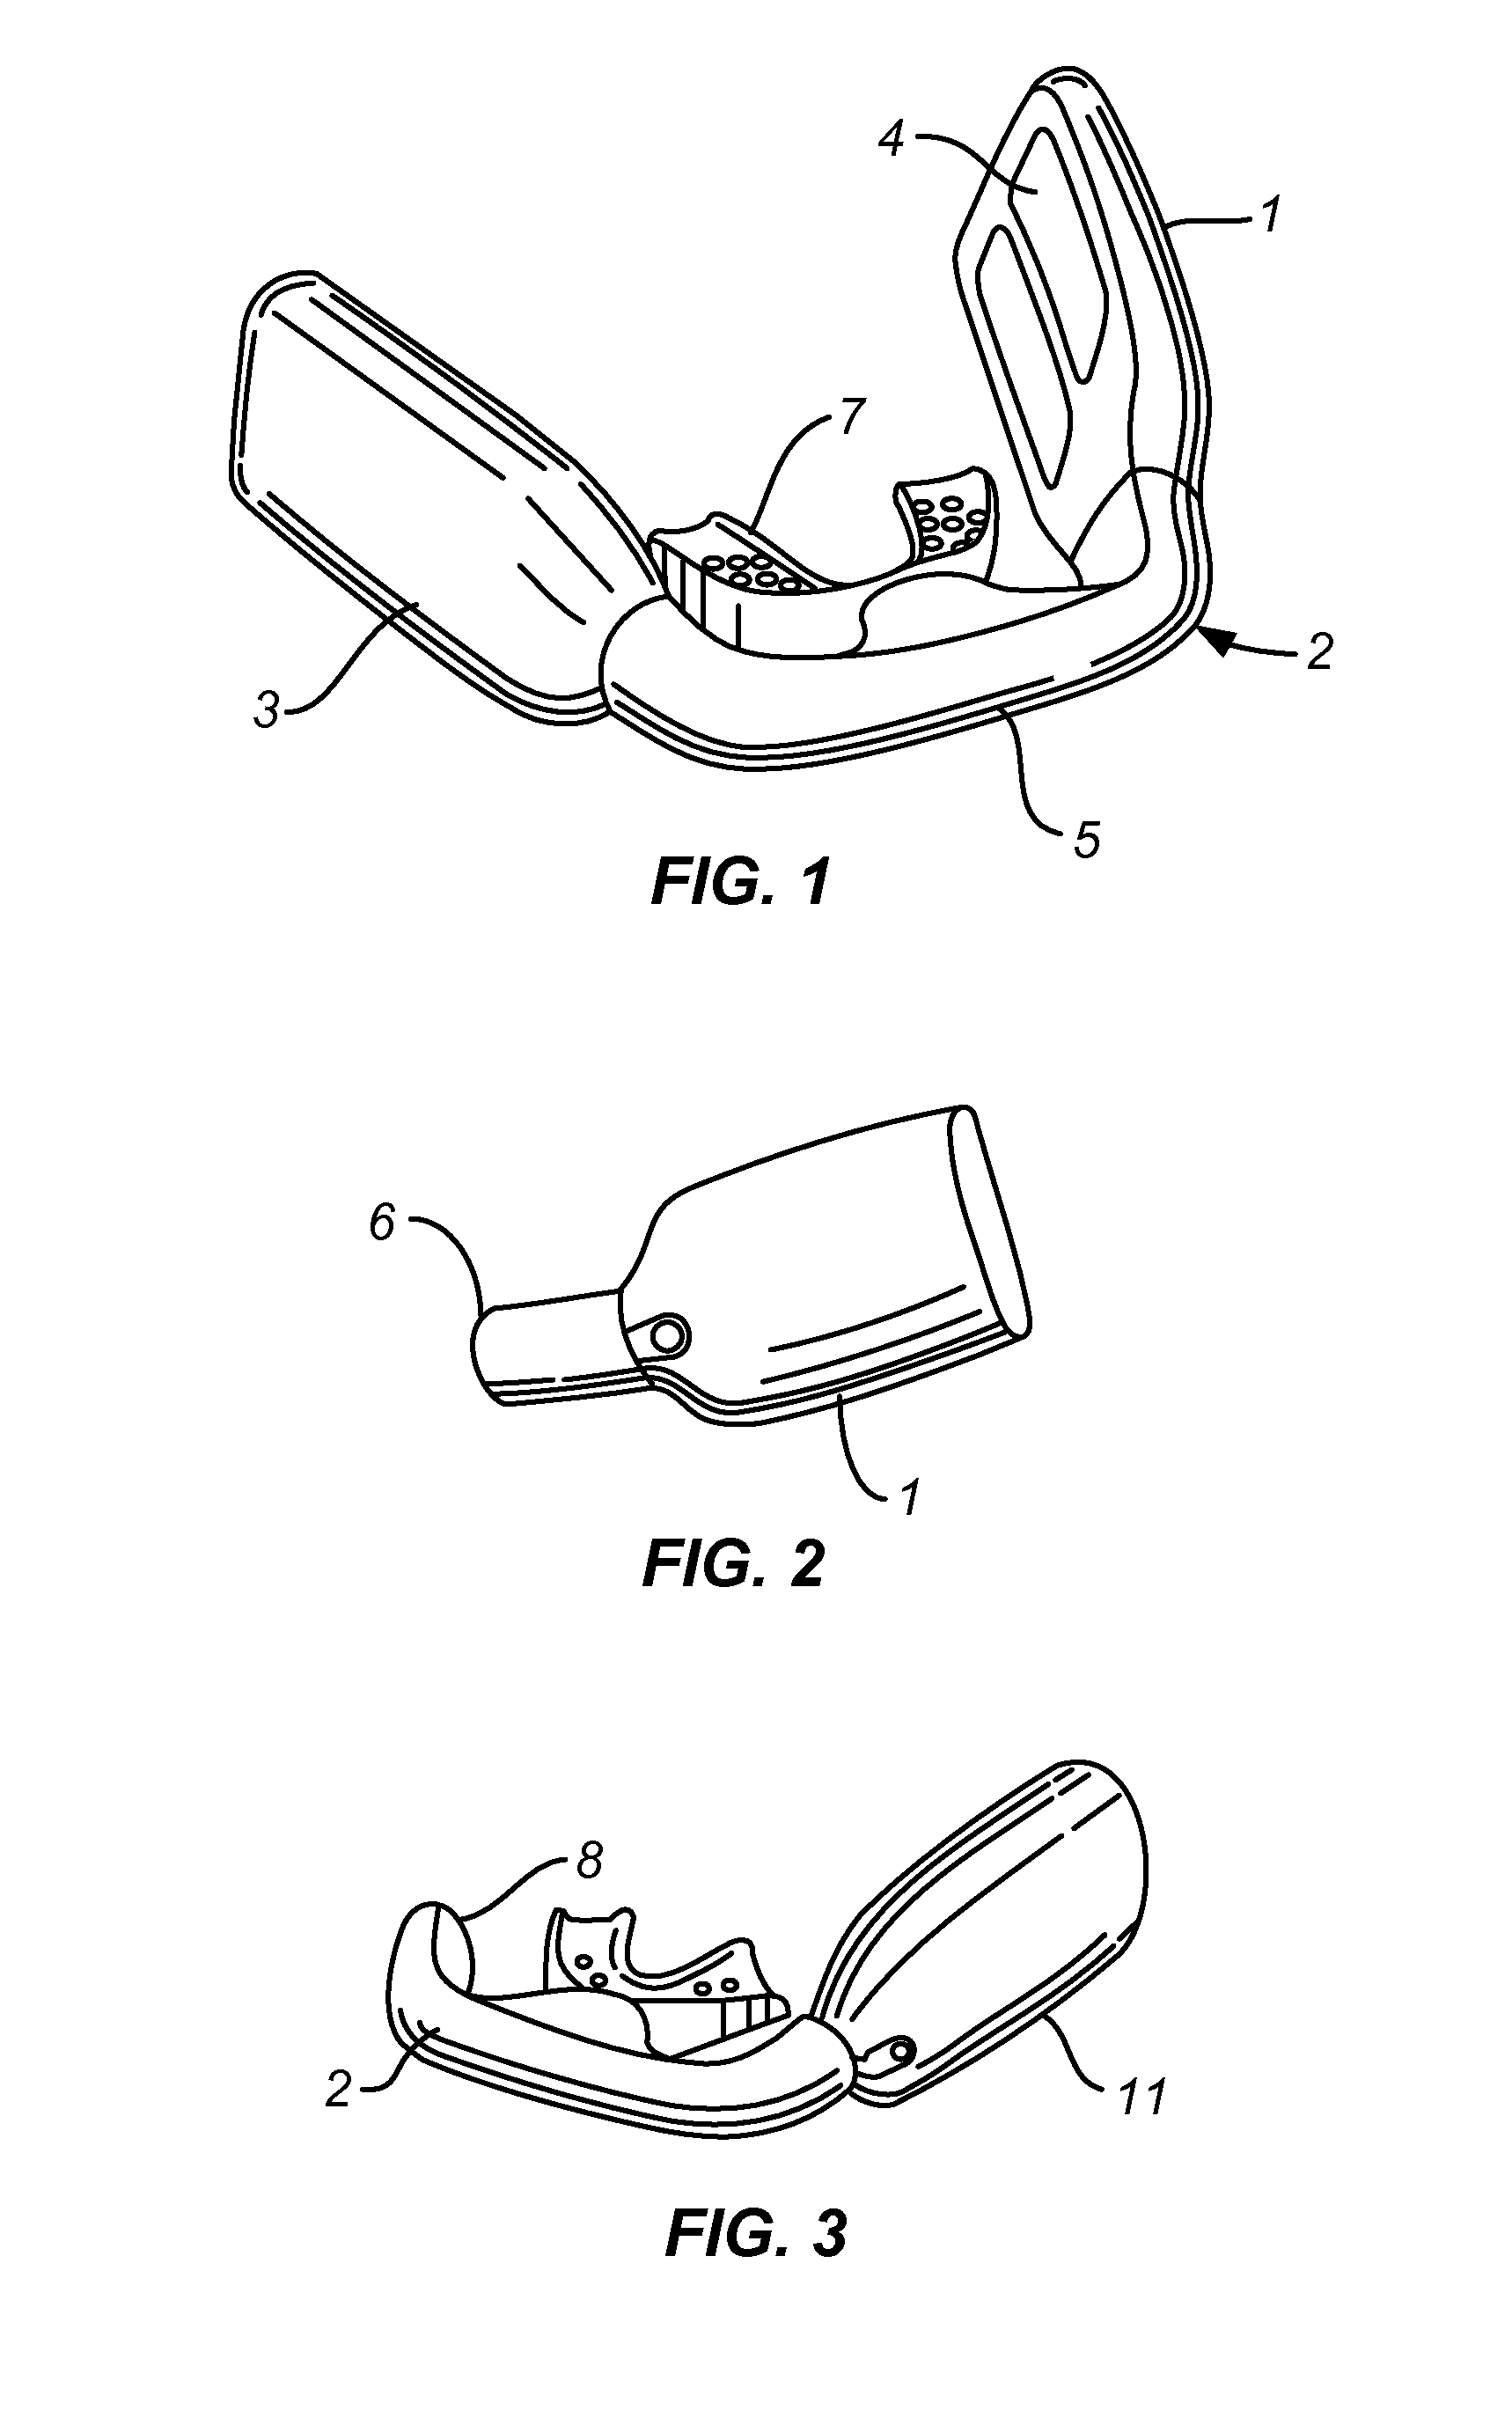 Methods for treatment of bone disorders and biostimulation of bone and soft tissue